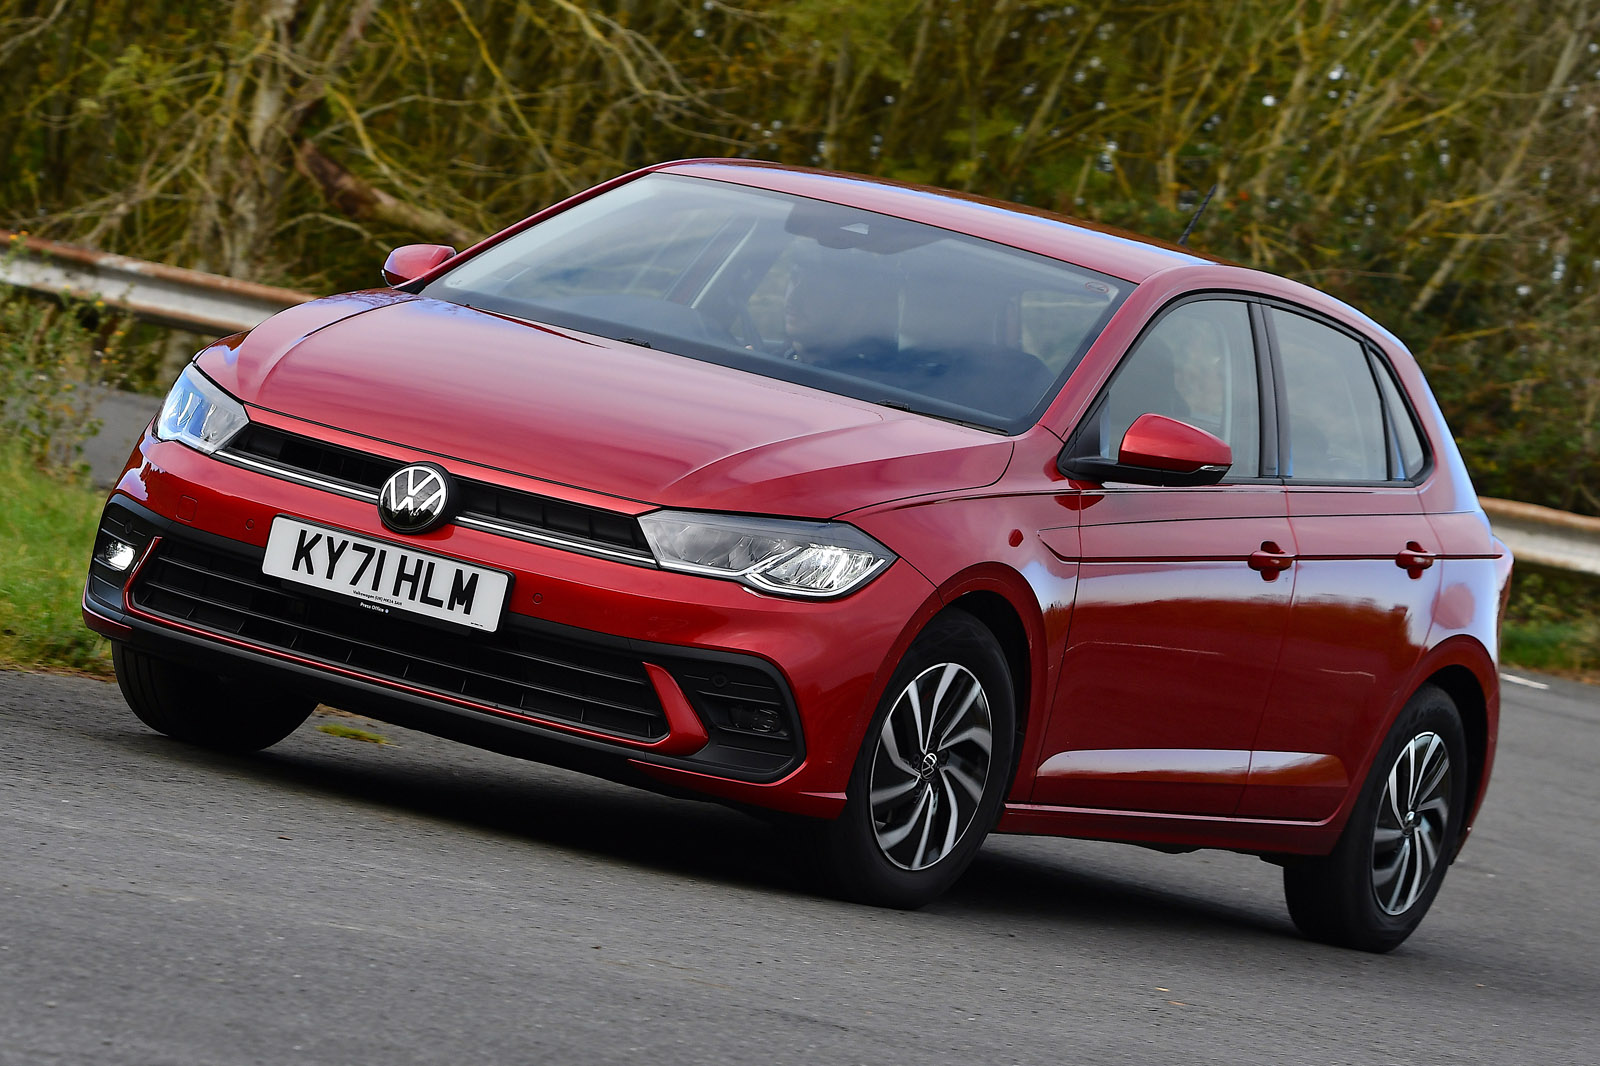 https://www.autocar.co.uk/sites/autocar.co.uk/files/images/car-reviews/first-drives/legacy/1-volkswagen-polo-2021-uk-first-drive-review-lead.jpg